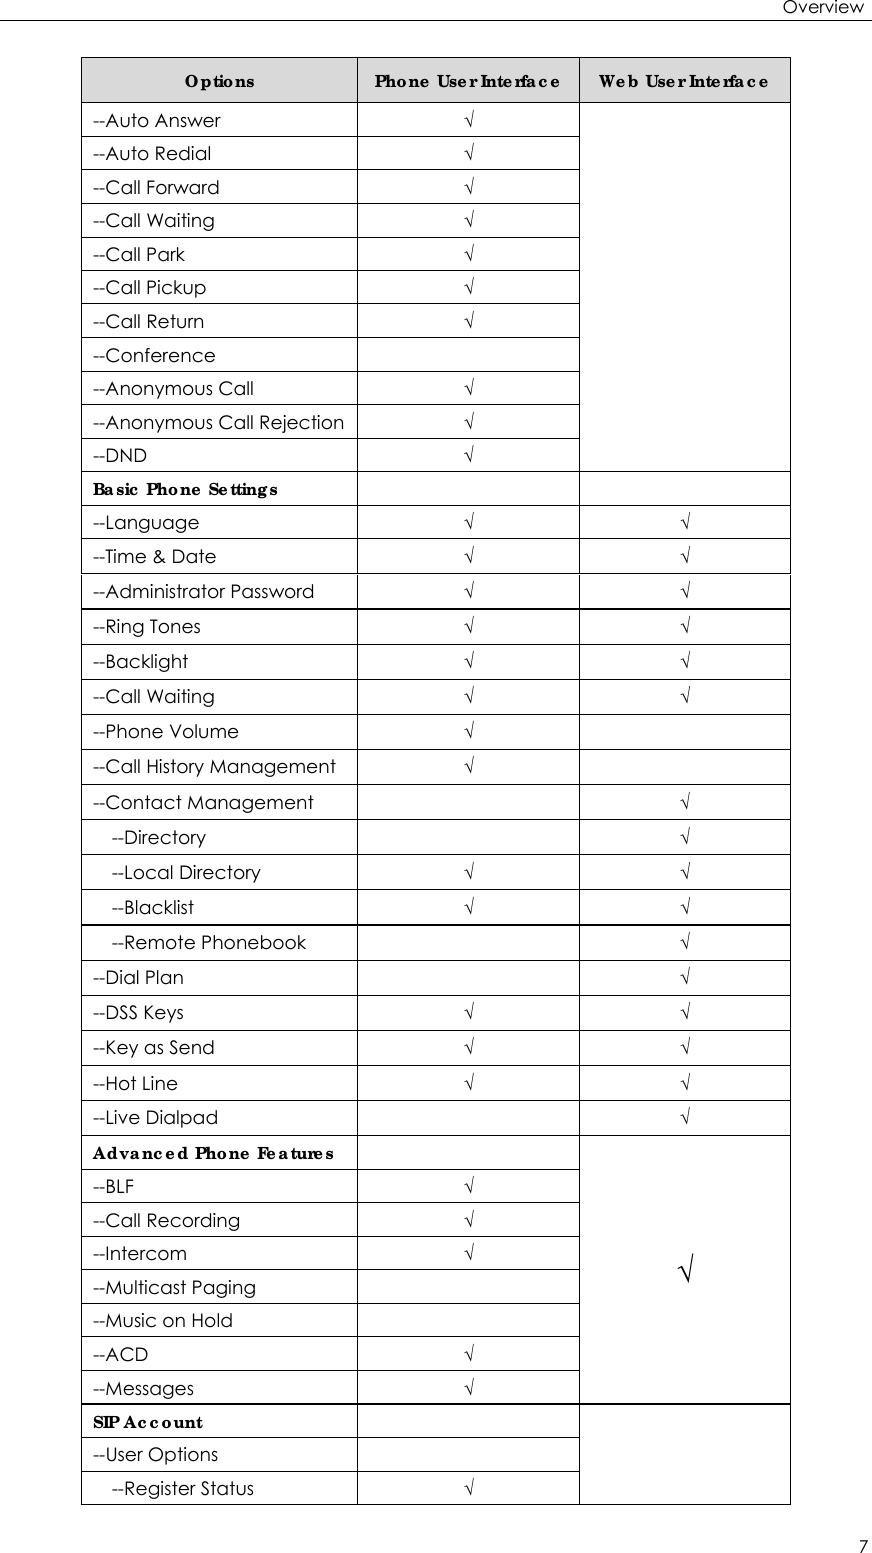 Overview 7 Options  Phone User Interface Web User Interface --Auto Answer √ --Auto Redial  √ --Call Forward  √ --Call Waiting  √ --Call Park  √ --Call Pickup  √ --Call Return  √ --Conference  --Anonymous Call  √ --Anonymous Call Rejection √ --DND √ Basic Phone Settings    --Language √ √ --Time &amp; Date  √ √ --Administrator Password  √ √ --Ring Tones  √ √ --Backlight  √ √ --Call Waiting  √ √ --Phone Volume  √  --Call History Management  √  --Contact Management    √ --Directory  √ --Local Directory  √ √ --Blacklist  √ √ --Remote Phonebook    √ --Dial Plan    √ --DSS Keys  √ √ --Key as Send  √ √ --Hot Line  √ √ --Live Dialpad    √ Advanced Phone Features   √ --BLF  √ --Call Recording  √ --Intercom  √ --Multicast Paging   --Music on Hold   --ACD  √ --Messages √ SIP Account    --User Options   --Register Status  √ 